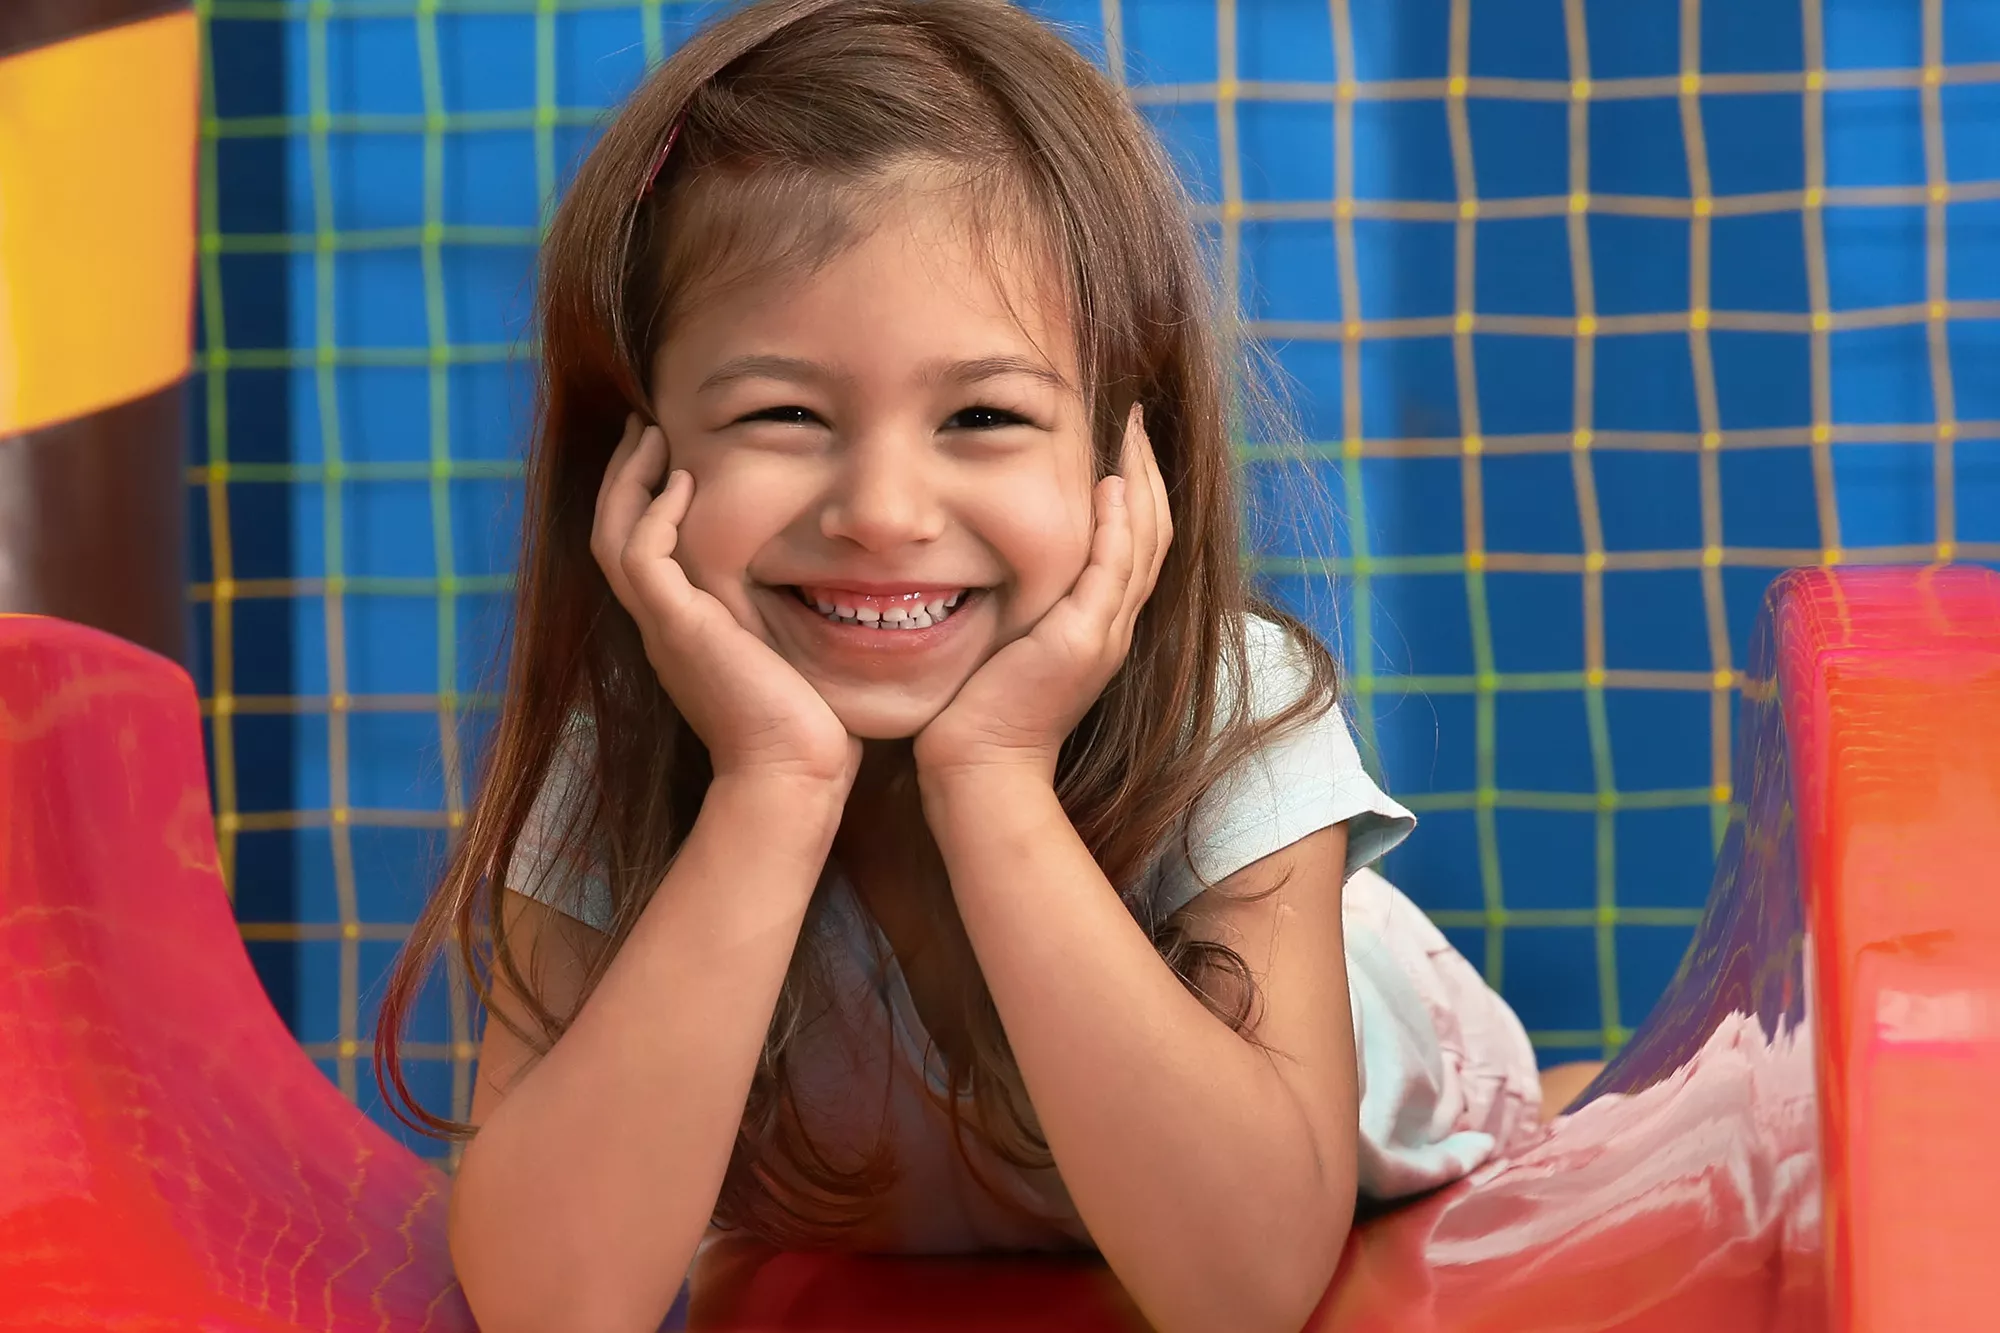 Child Smiling at the Top of a Red Slide